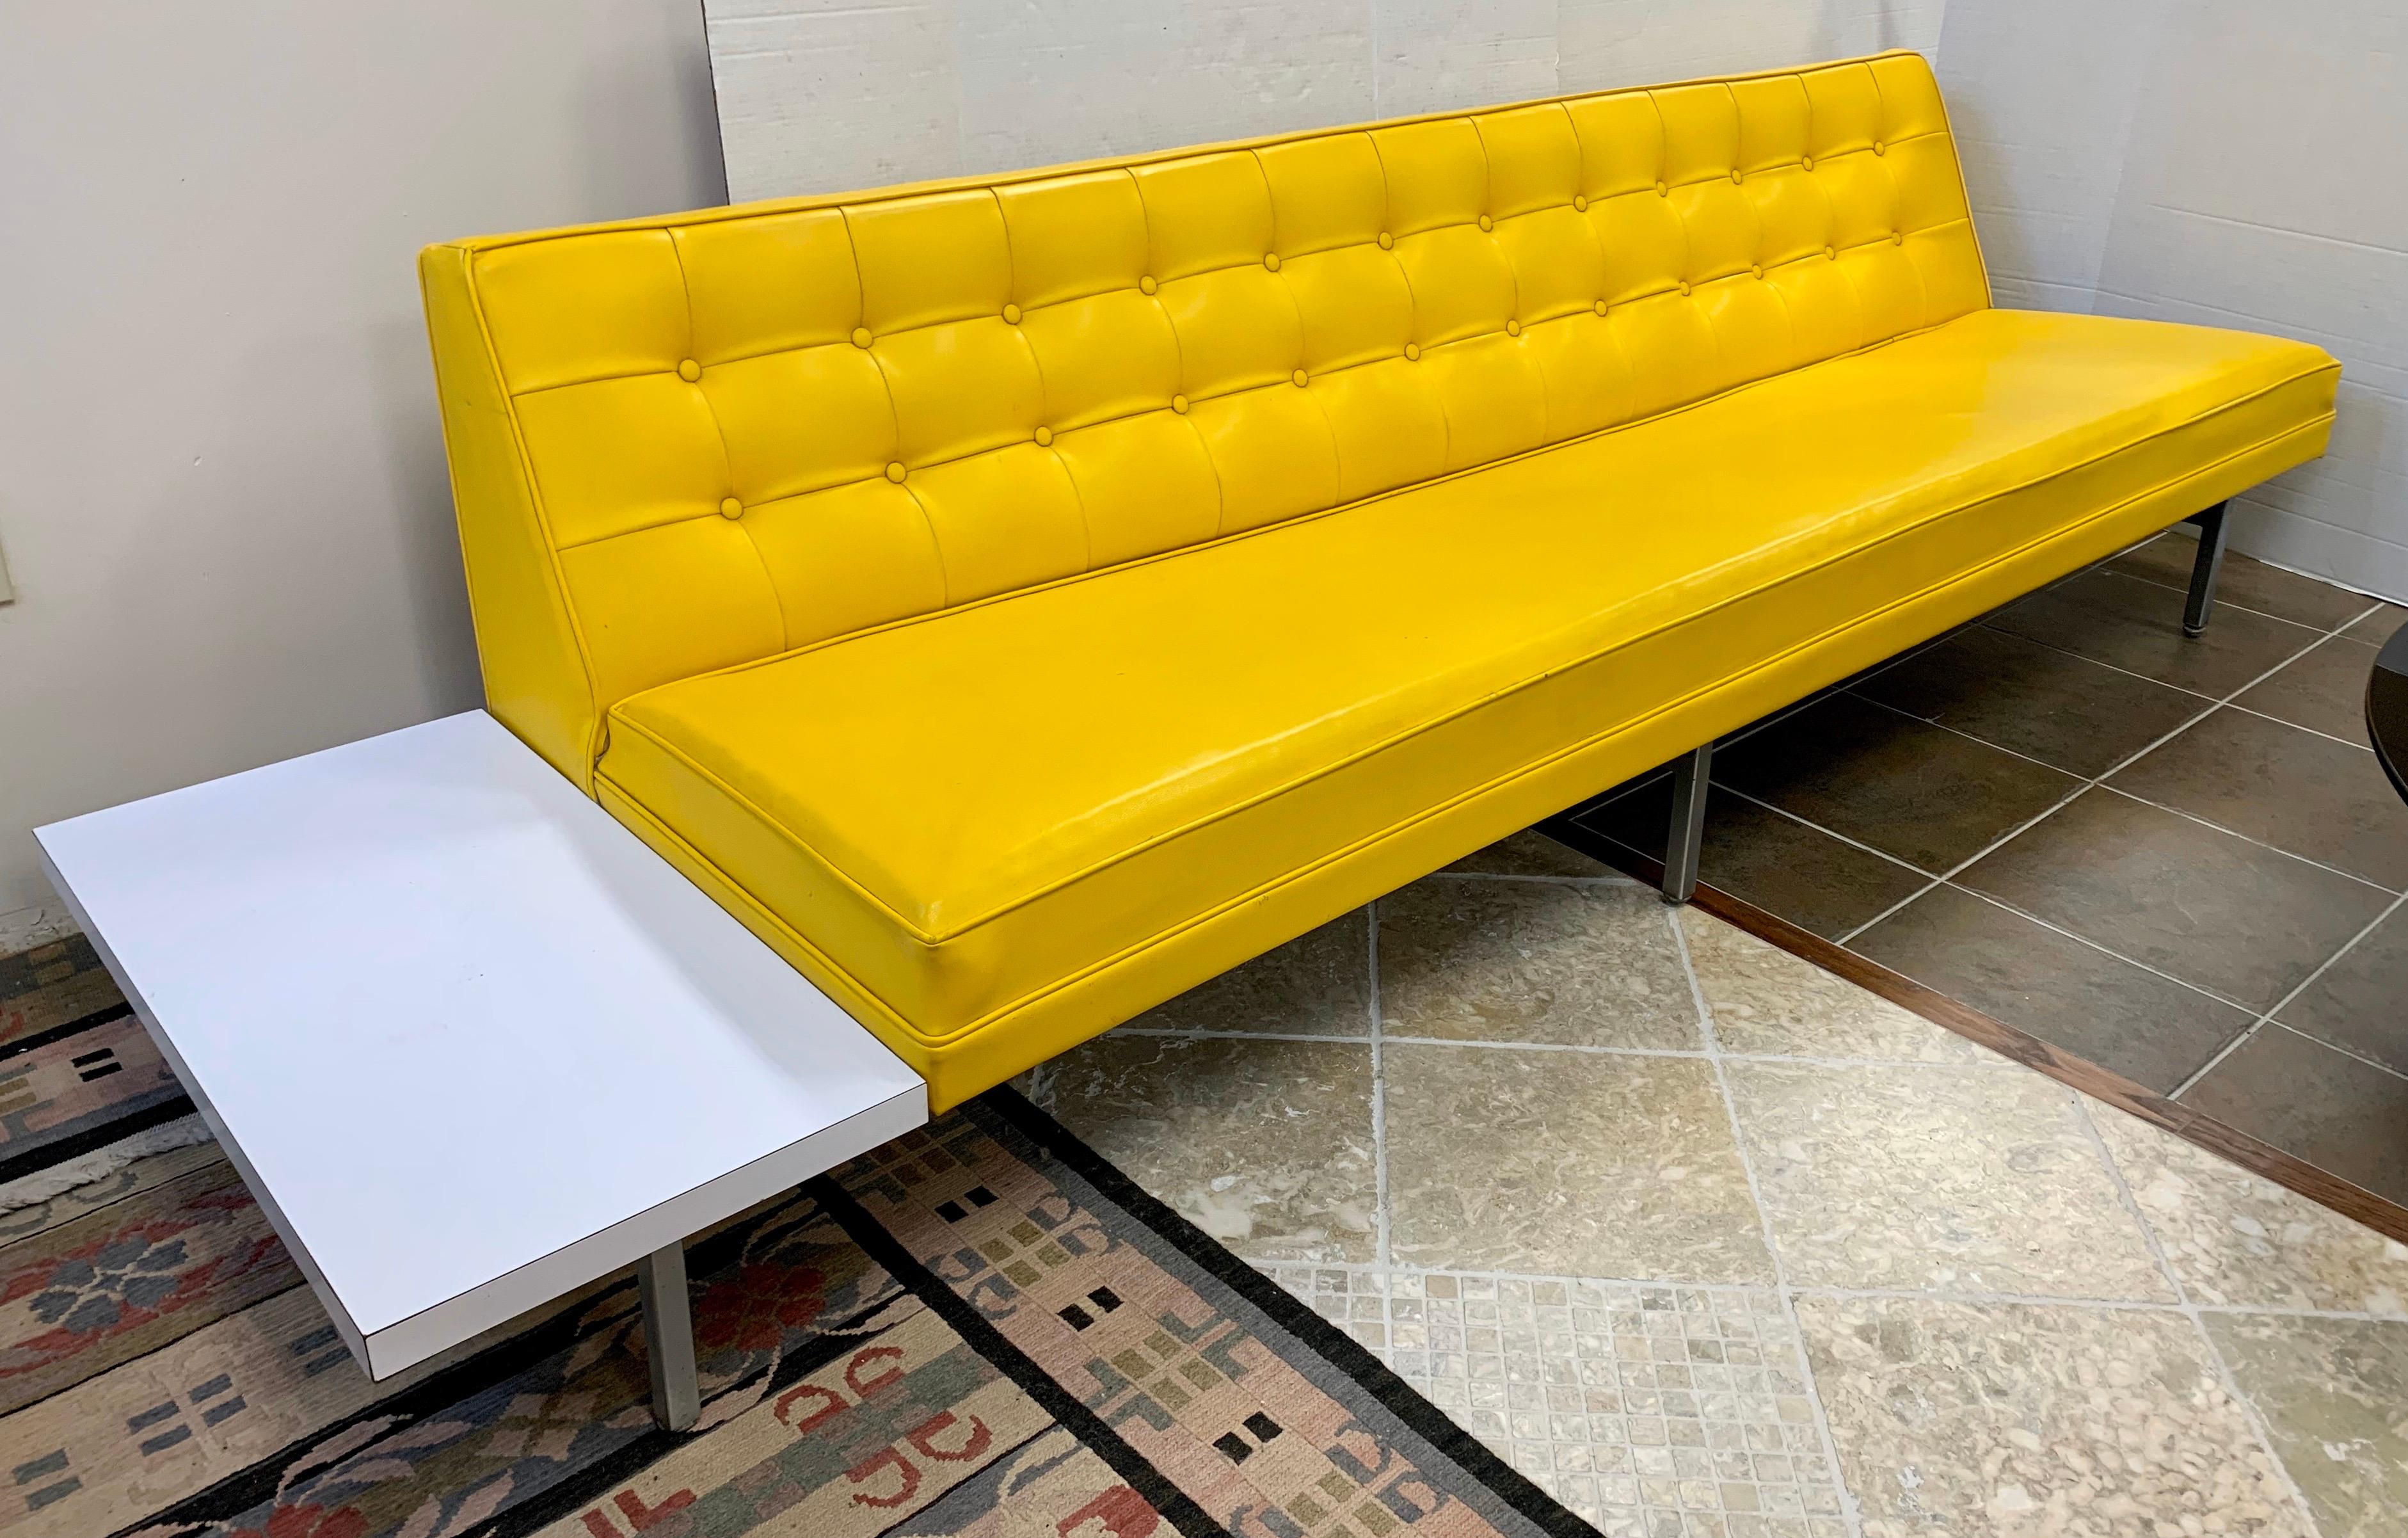 Elegant and iconic midcentury signed living room sofa designed by George Nelson for Herman Miller.
It features original banana yellow vinyl upholstery which is ultra rare and coveted.
The frame is made of chrome steel. It has an attached white